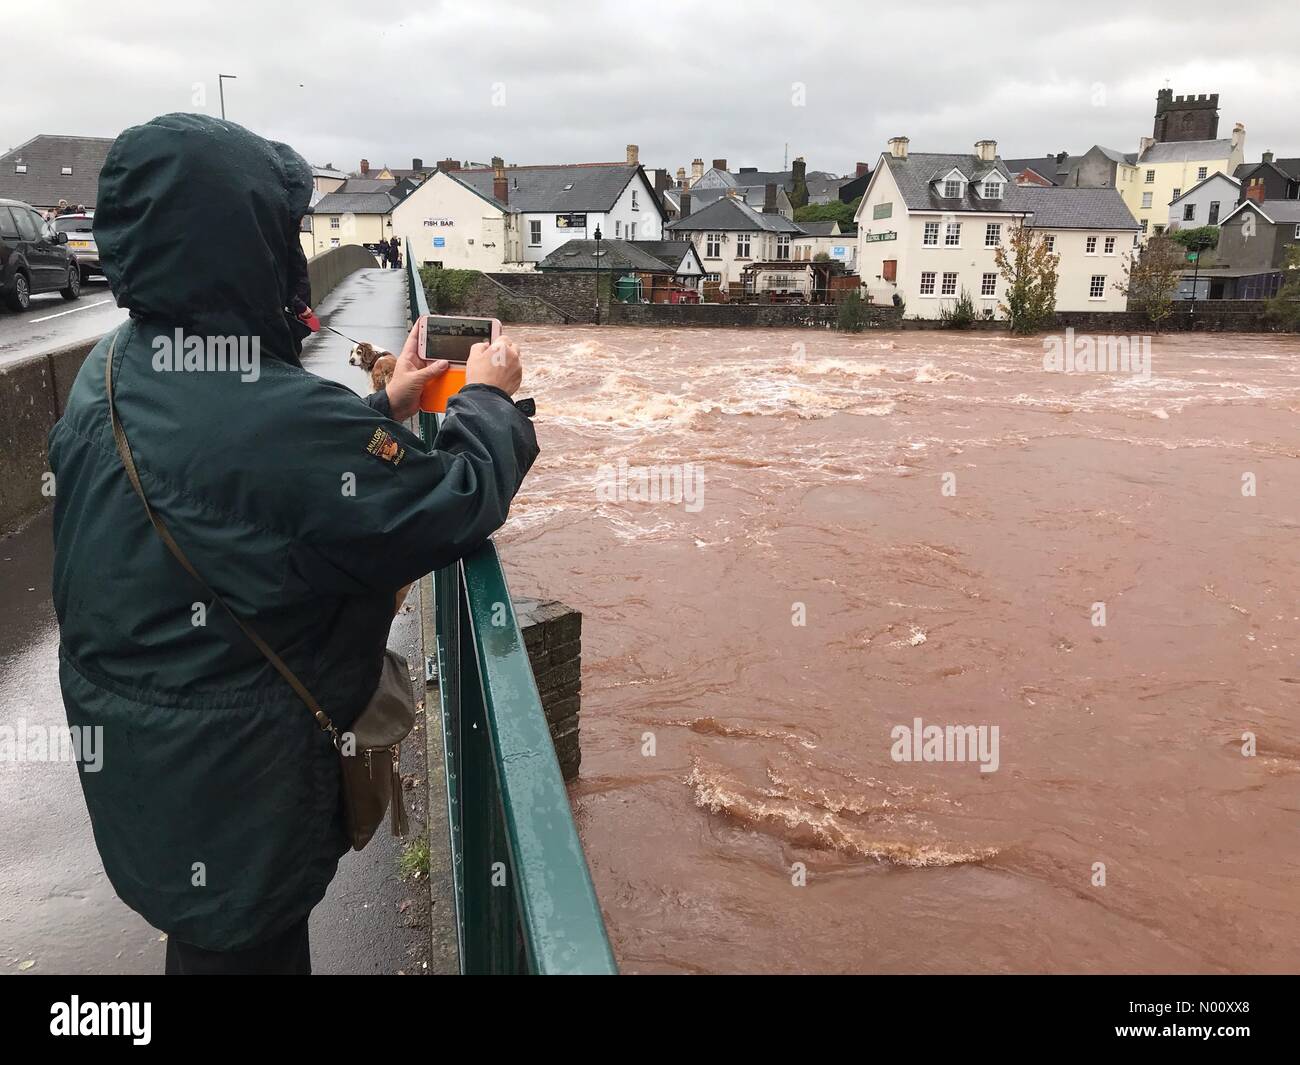 UK Weather - Floodwaters at Brecon Wales - Saturday 13th October 2018 - Visitors stop to watch the high levels on the River Usk in Brecon after Storm Callum brought torrential rain to Wales Stock Photo